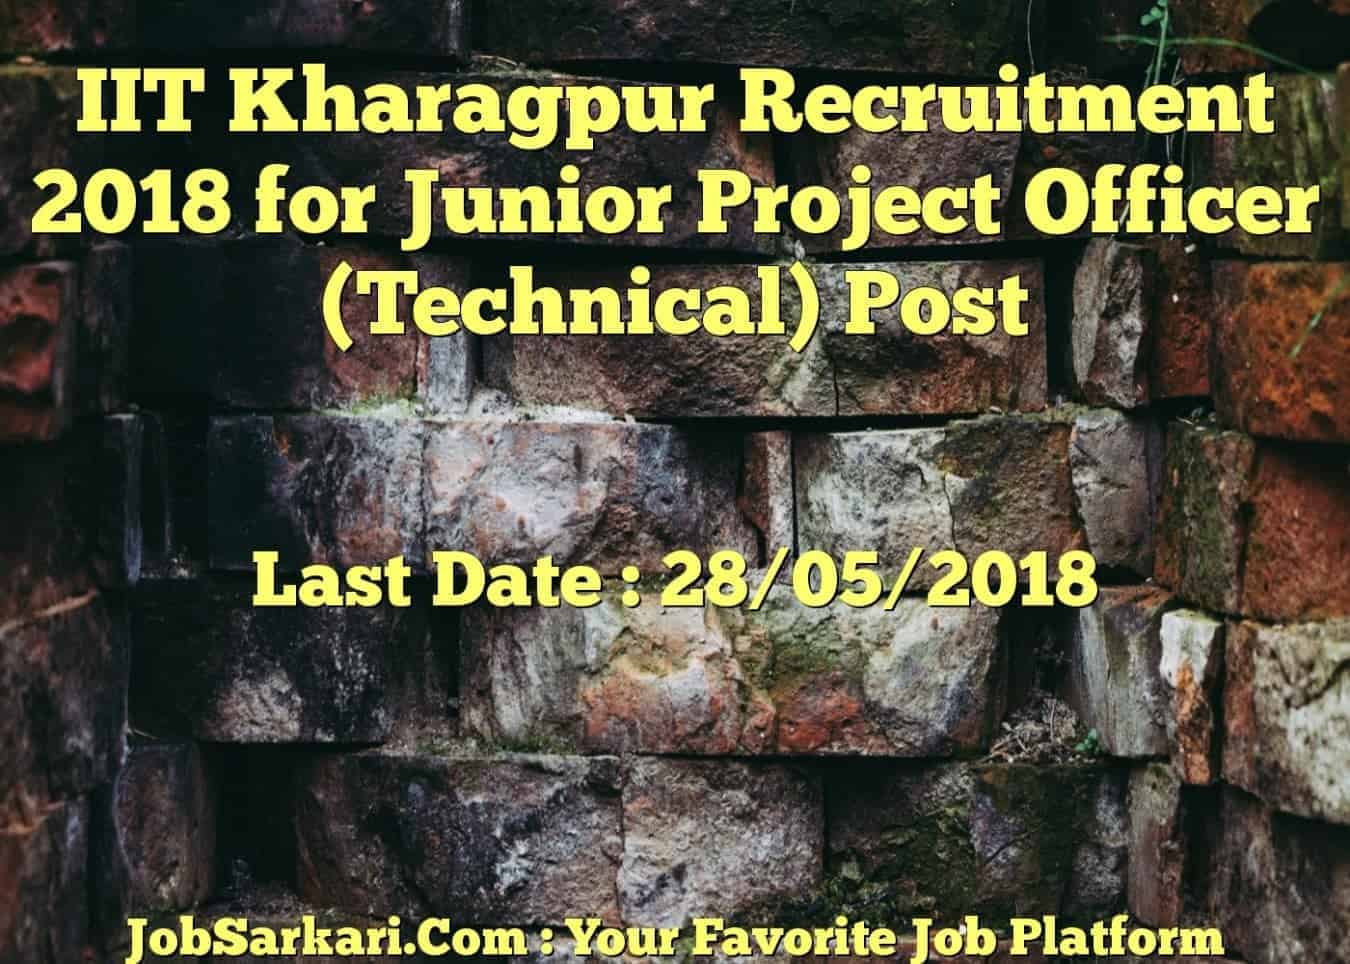 IIT Kharagpur Recruitment 2018 for Junior Project Officer (Technical) Post